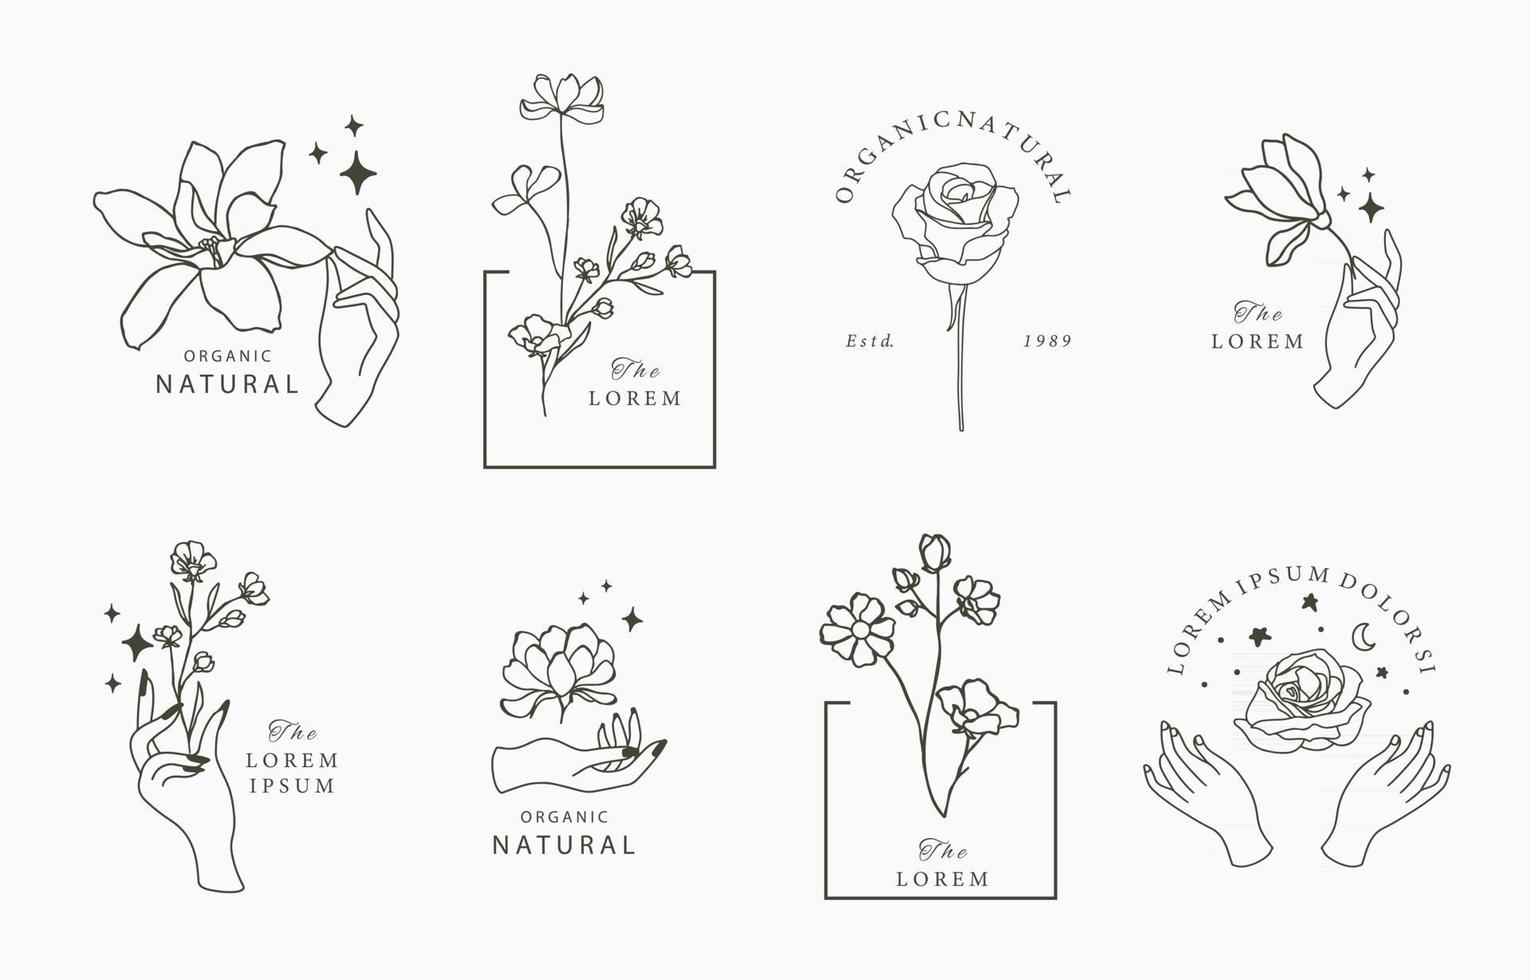 Beauty occult collection with flower vector